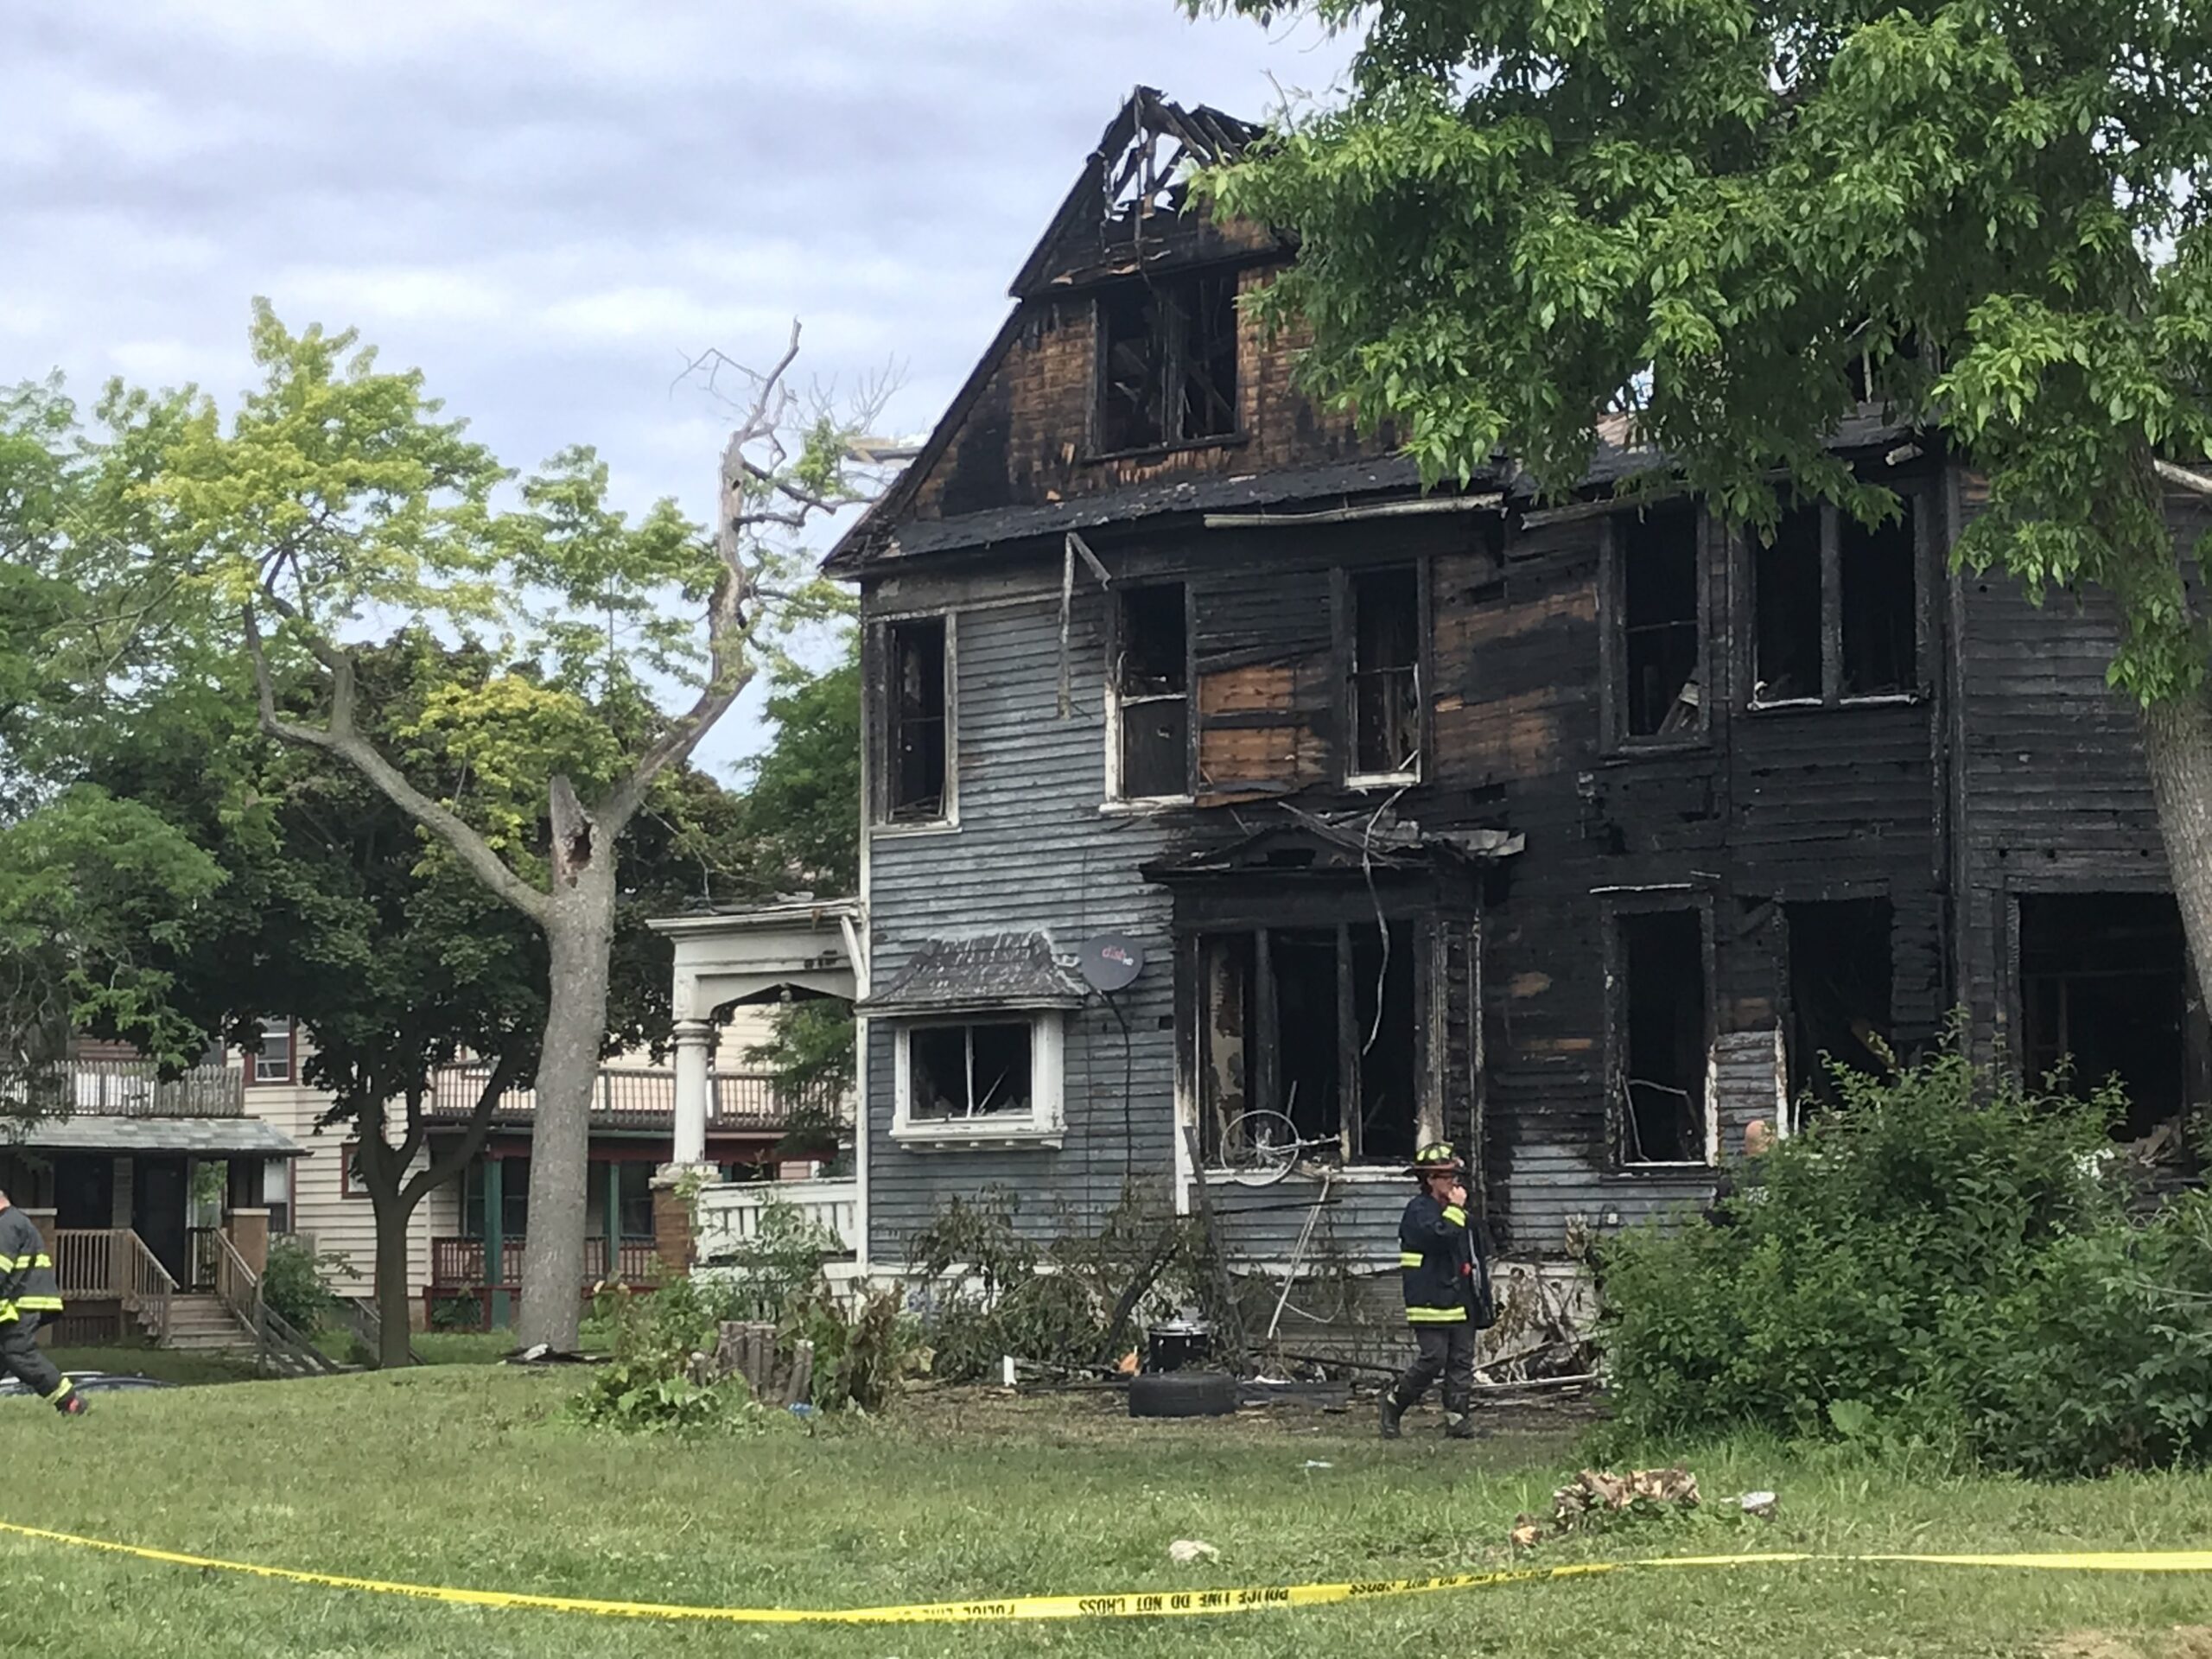 Milwaukee Fire Department inspectors examine a house that was set on fire during protests over missing girls on Milwaukee's west side.